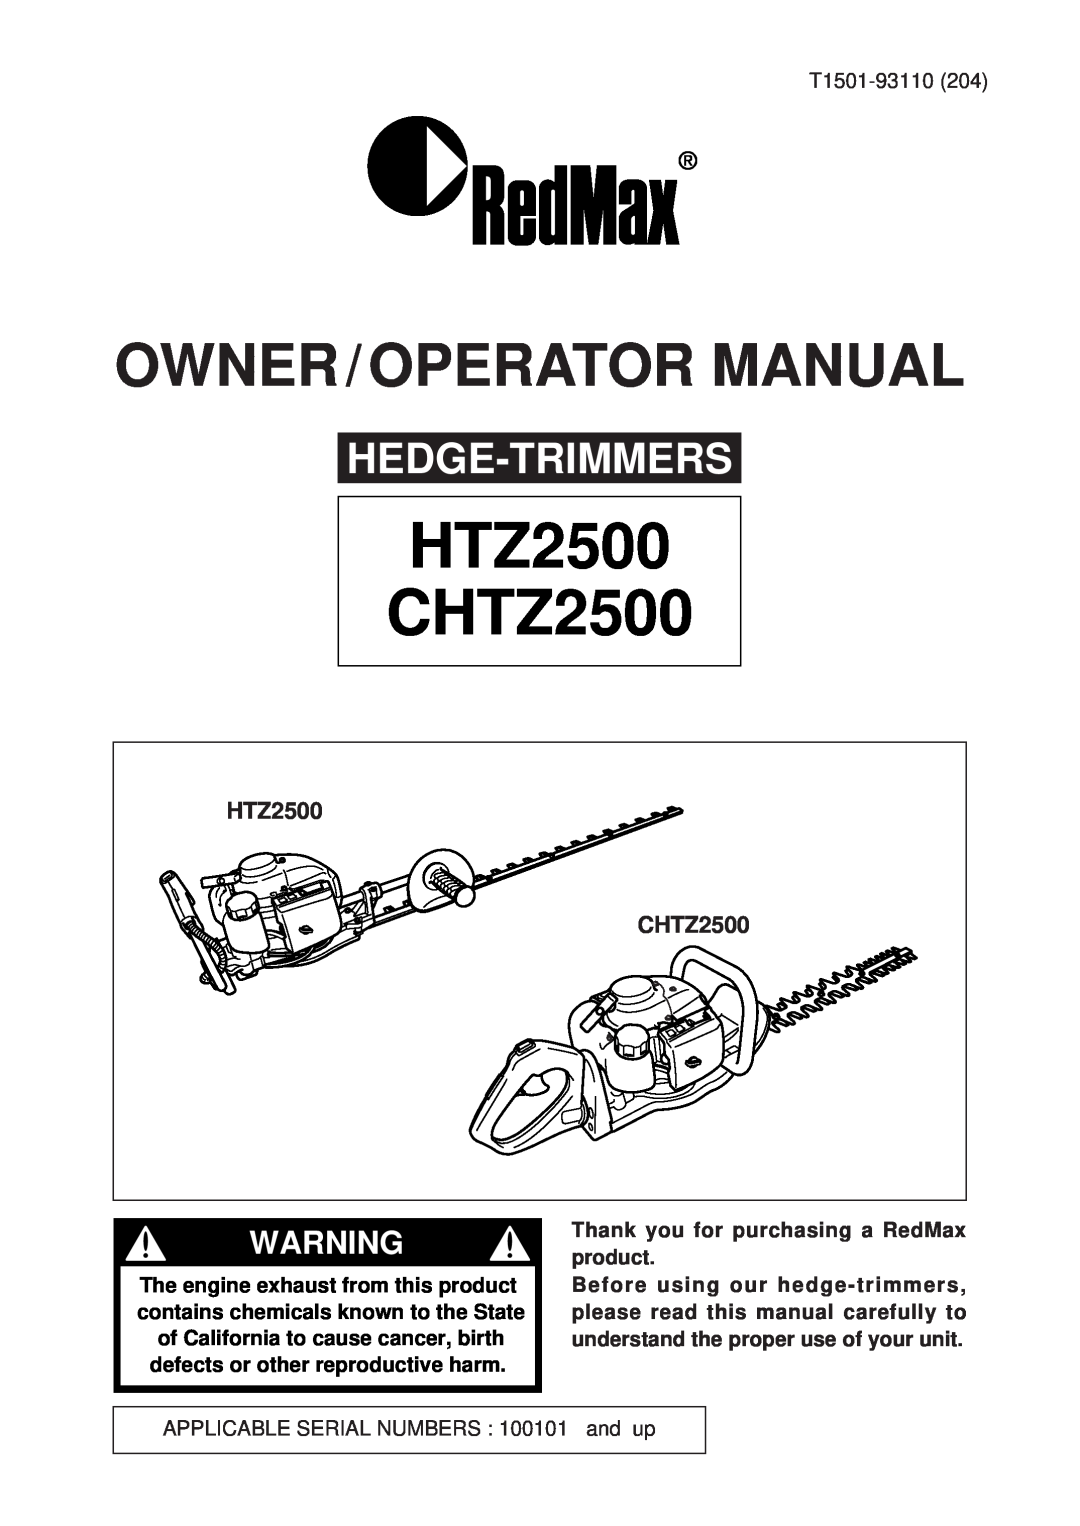 RedMax manual HTZ2500 CHTZ2500, Hedge-Trimmers, Owner / Operator Manual 